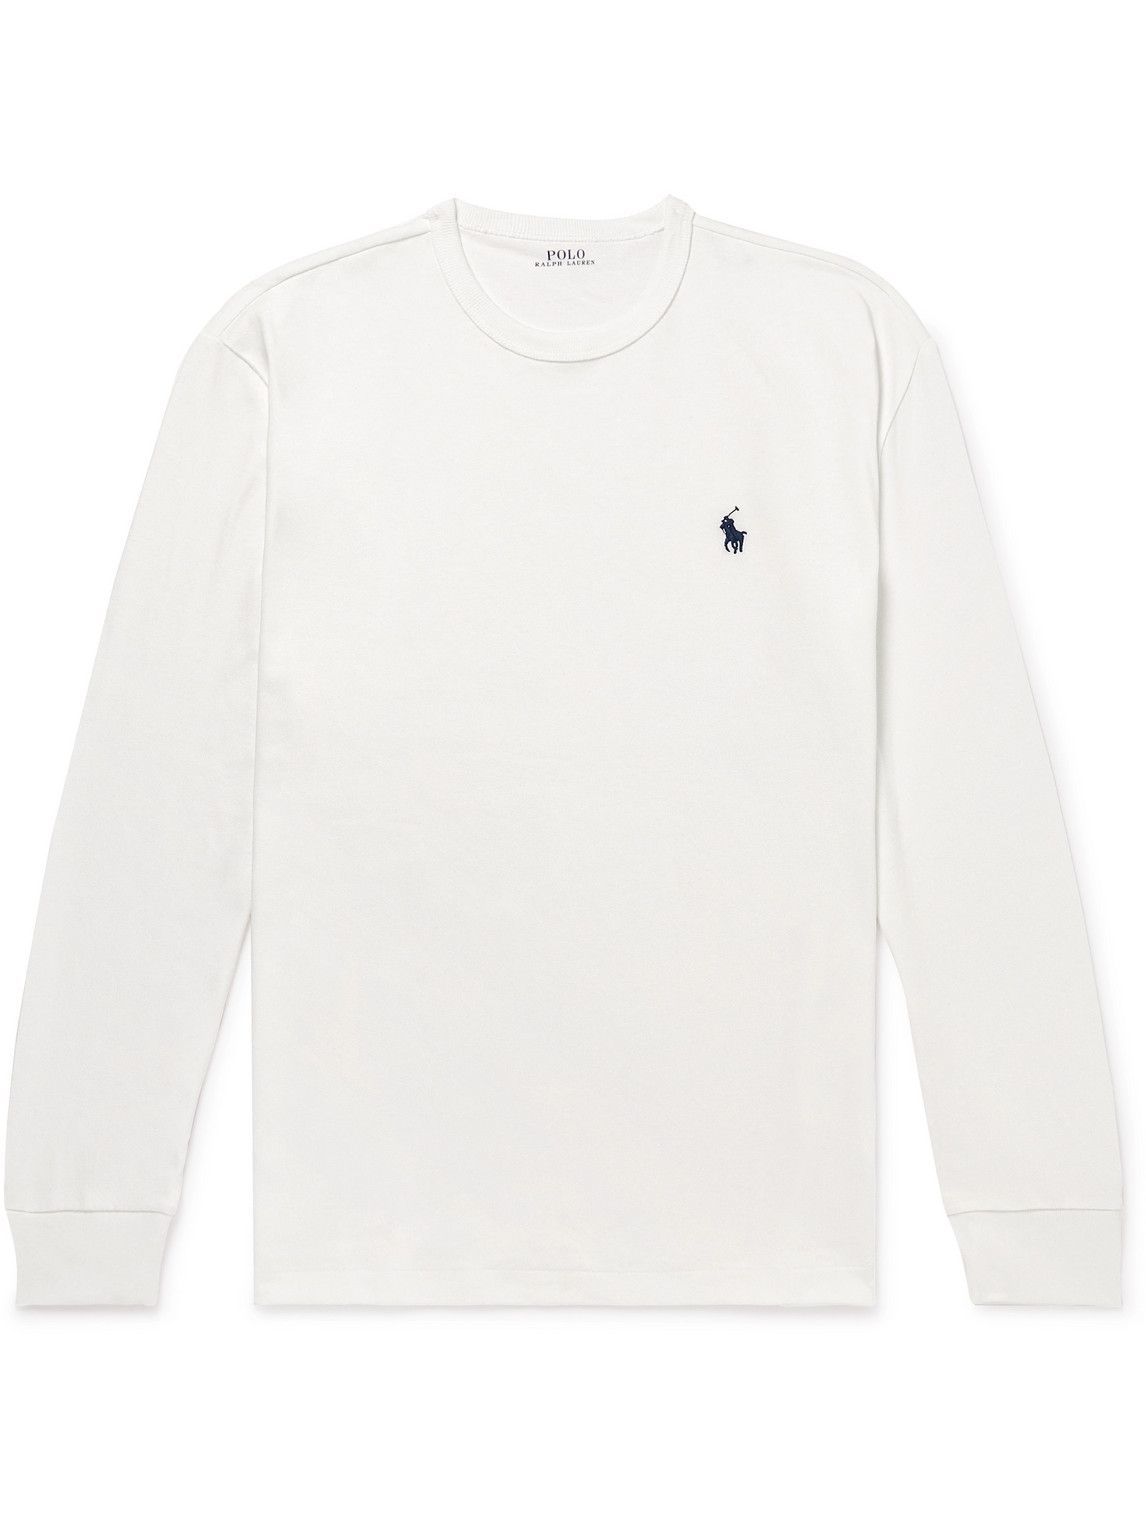 Photo: Polo Ralph Lauren - Logo-Embroidered Cotton-Jersey T-Shirt - White